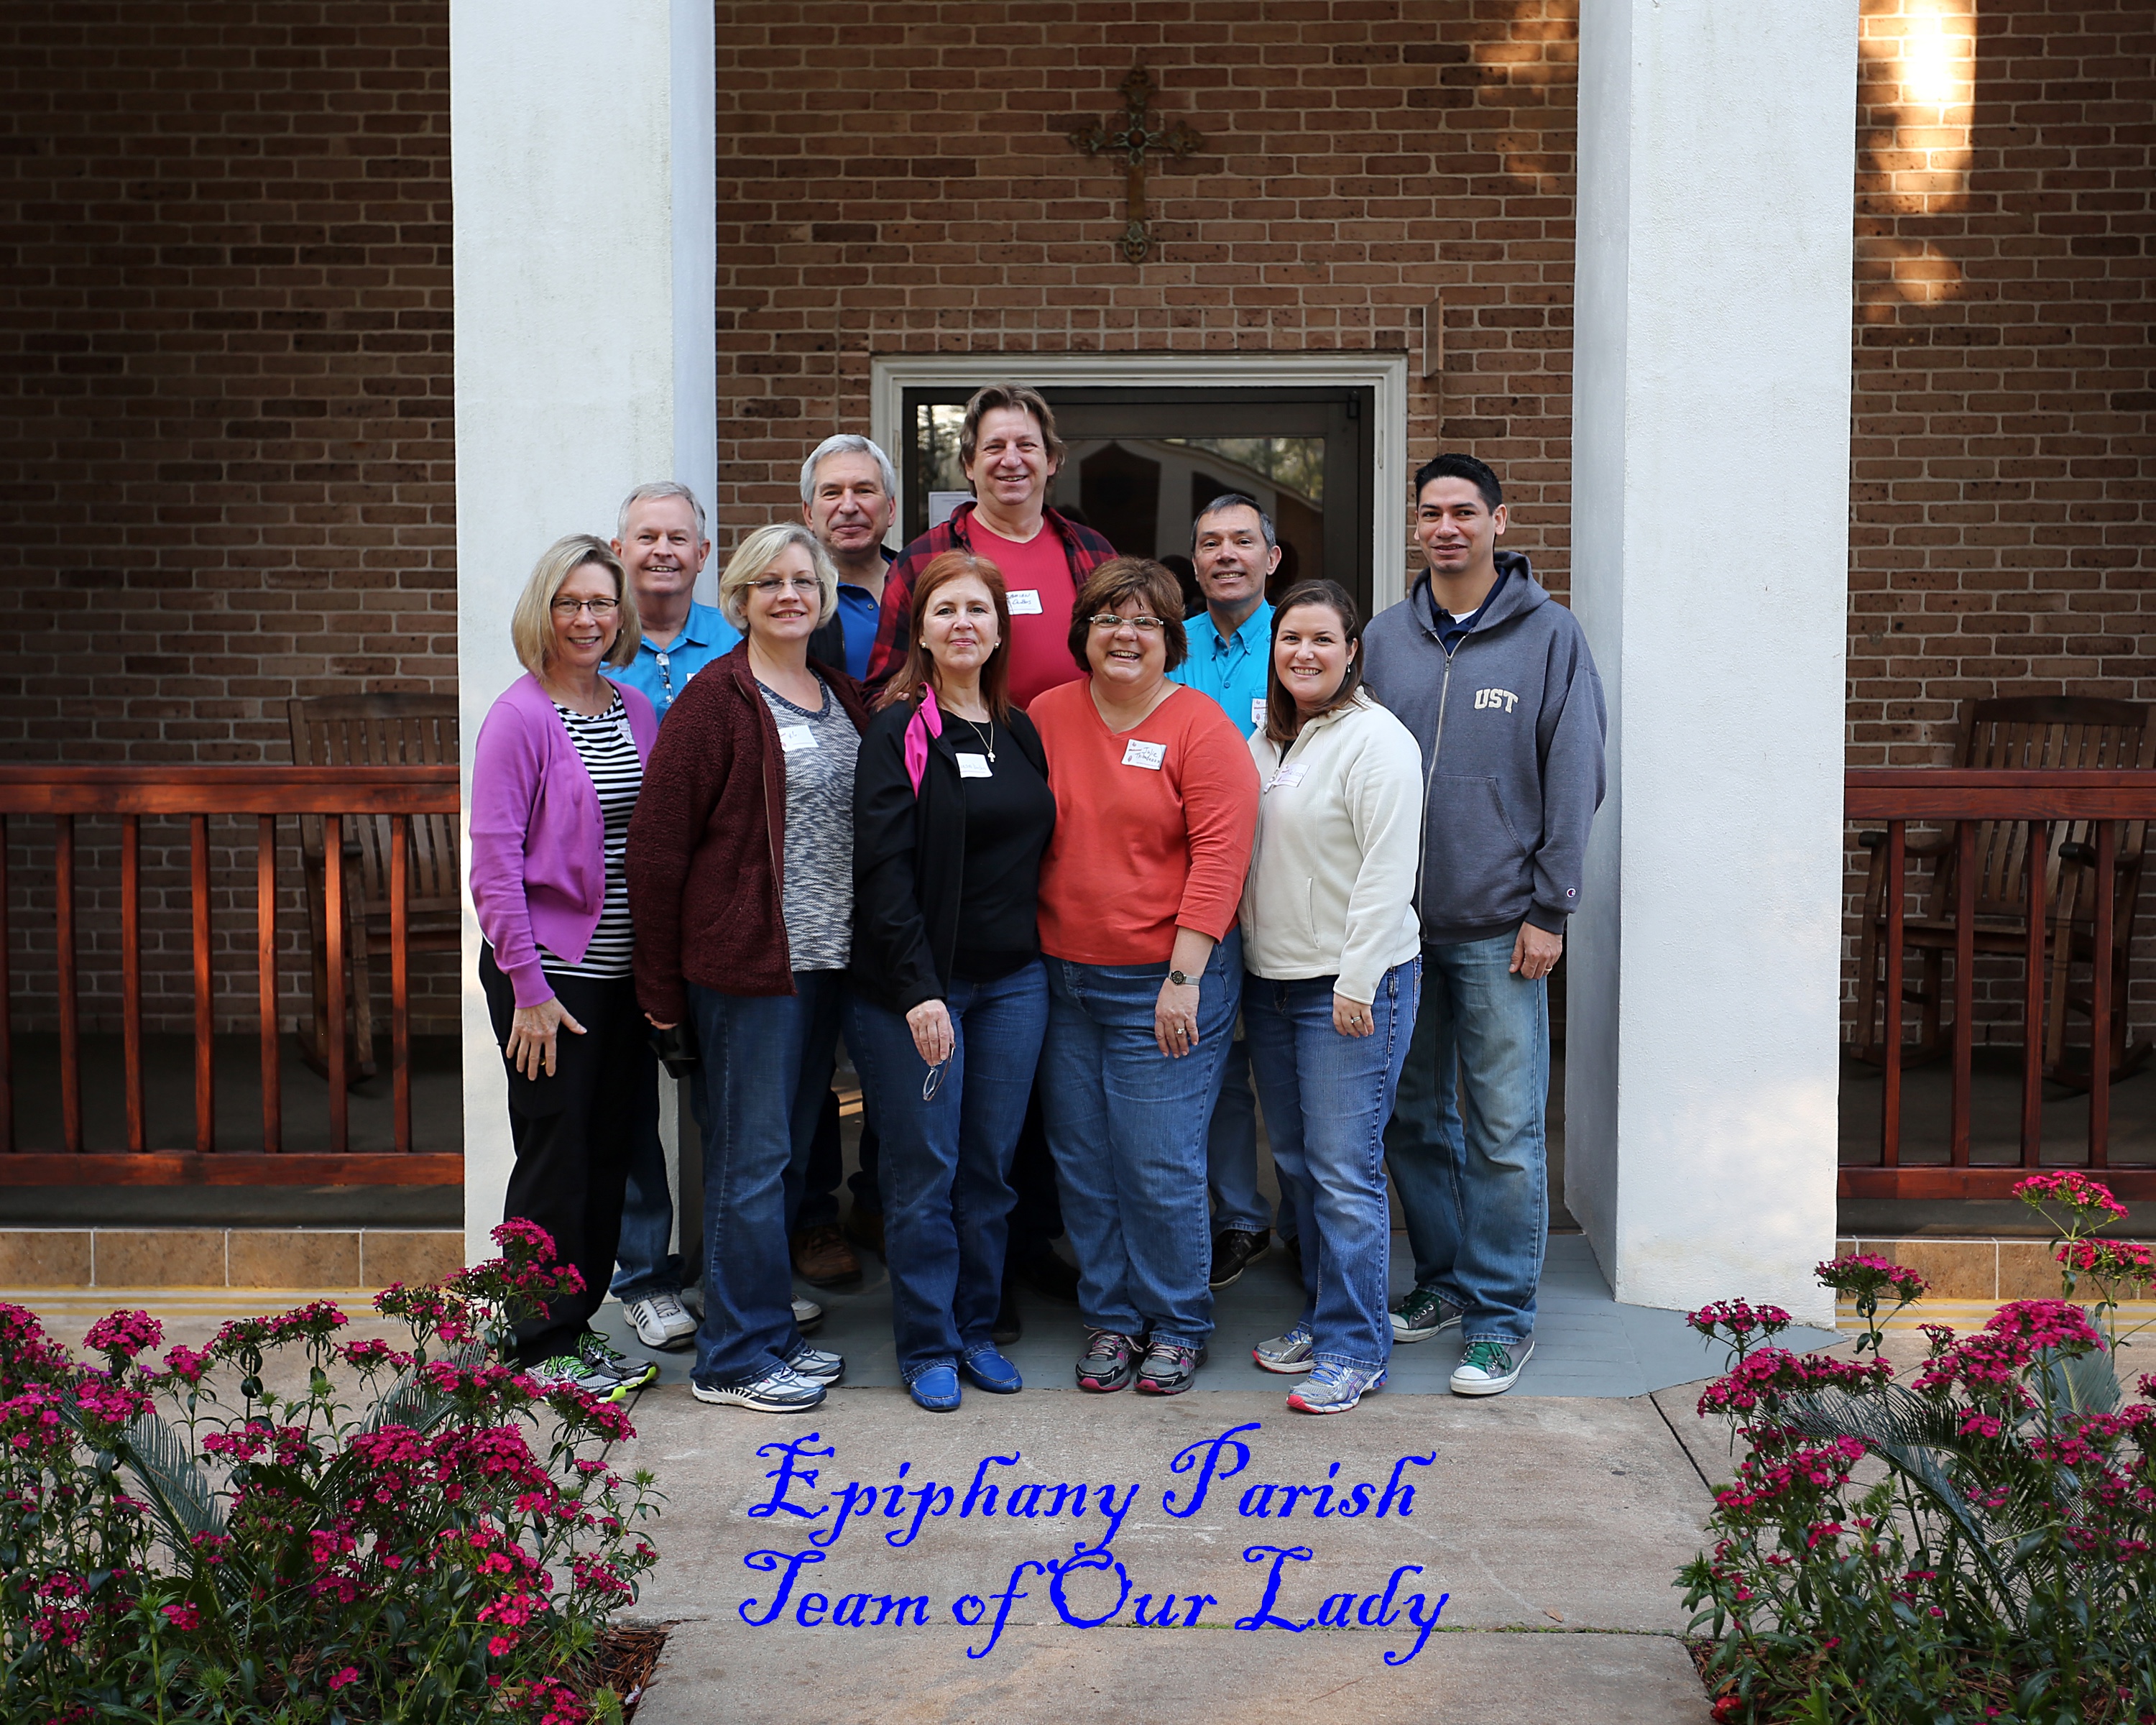 Married Couples Retreat, Feb. 13-15 2015-Epiphany  Parish, Team of Our Lady